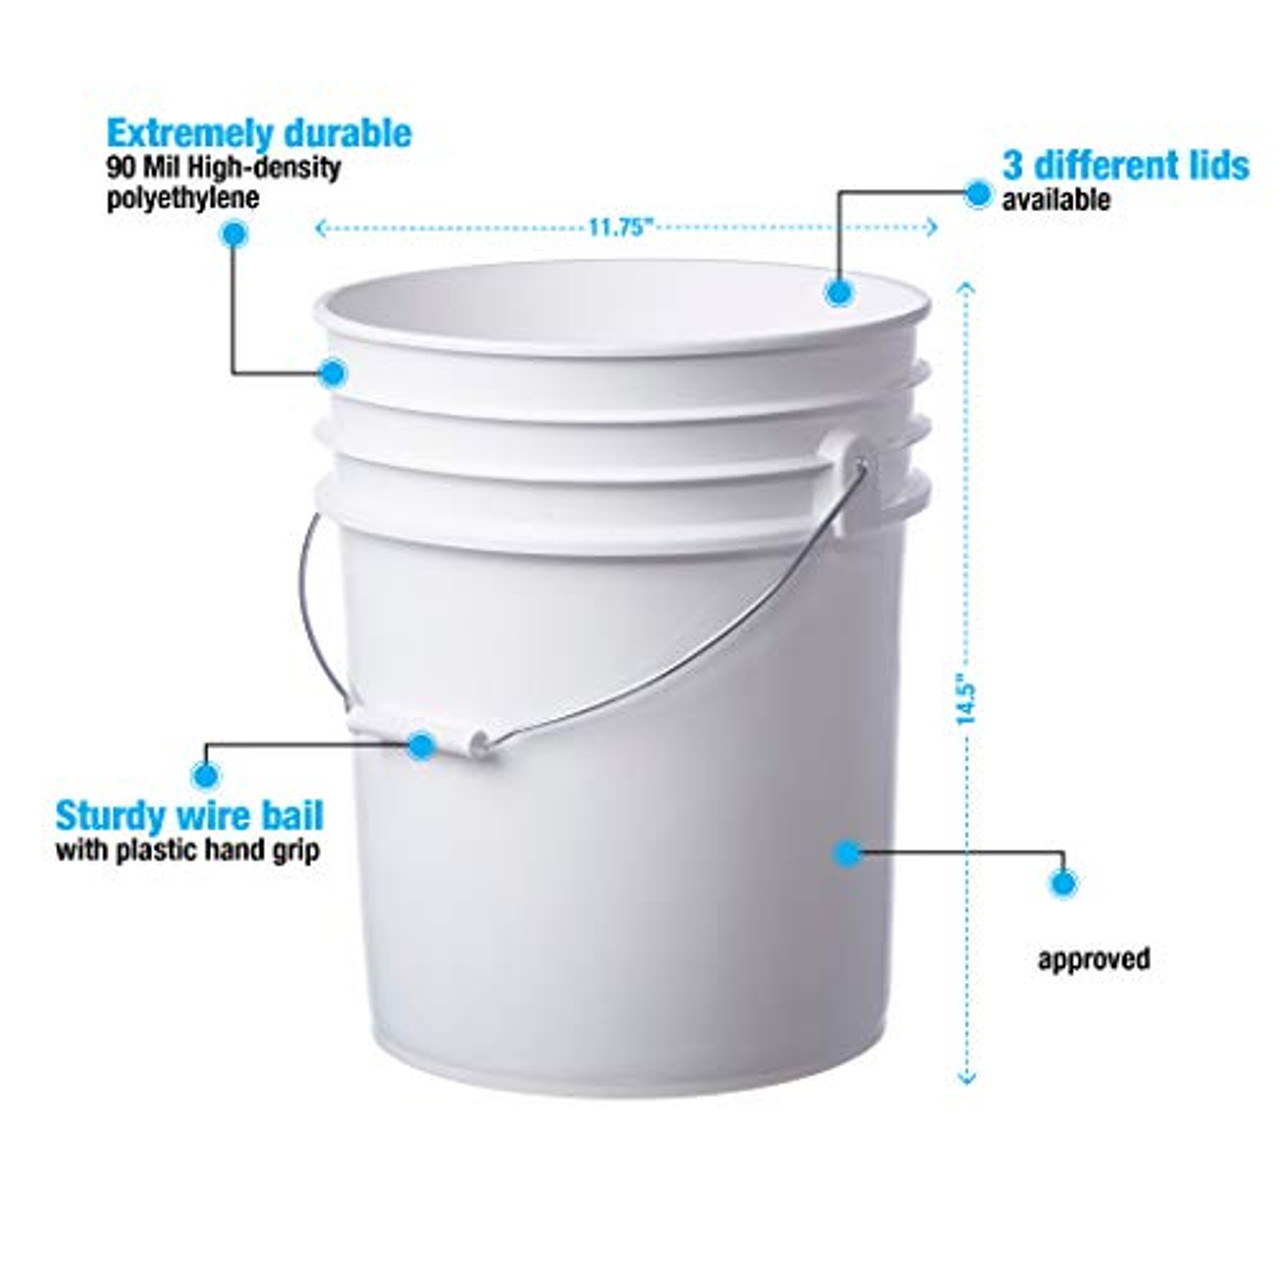 5 Gallon Premium Buckets with Wire Bail, Plastic Grips & Lids